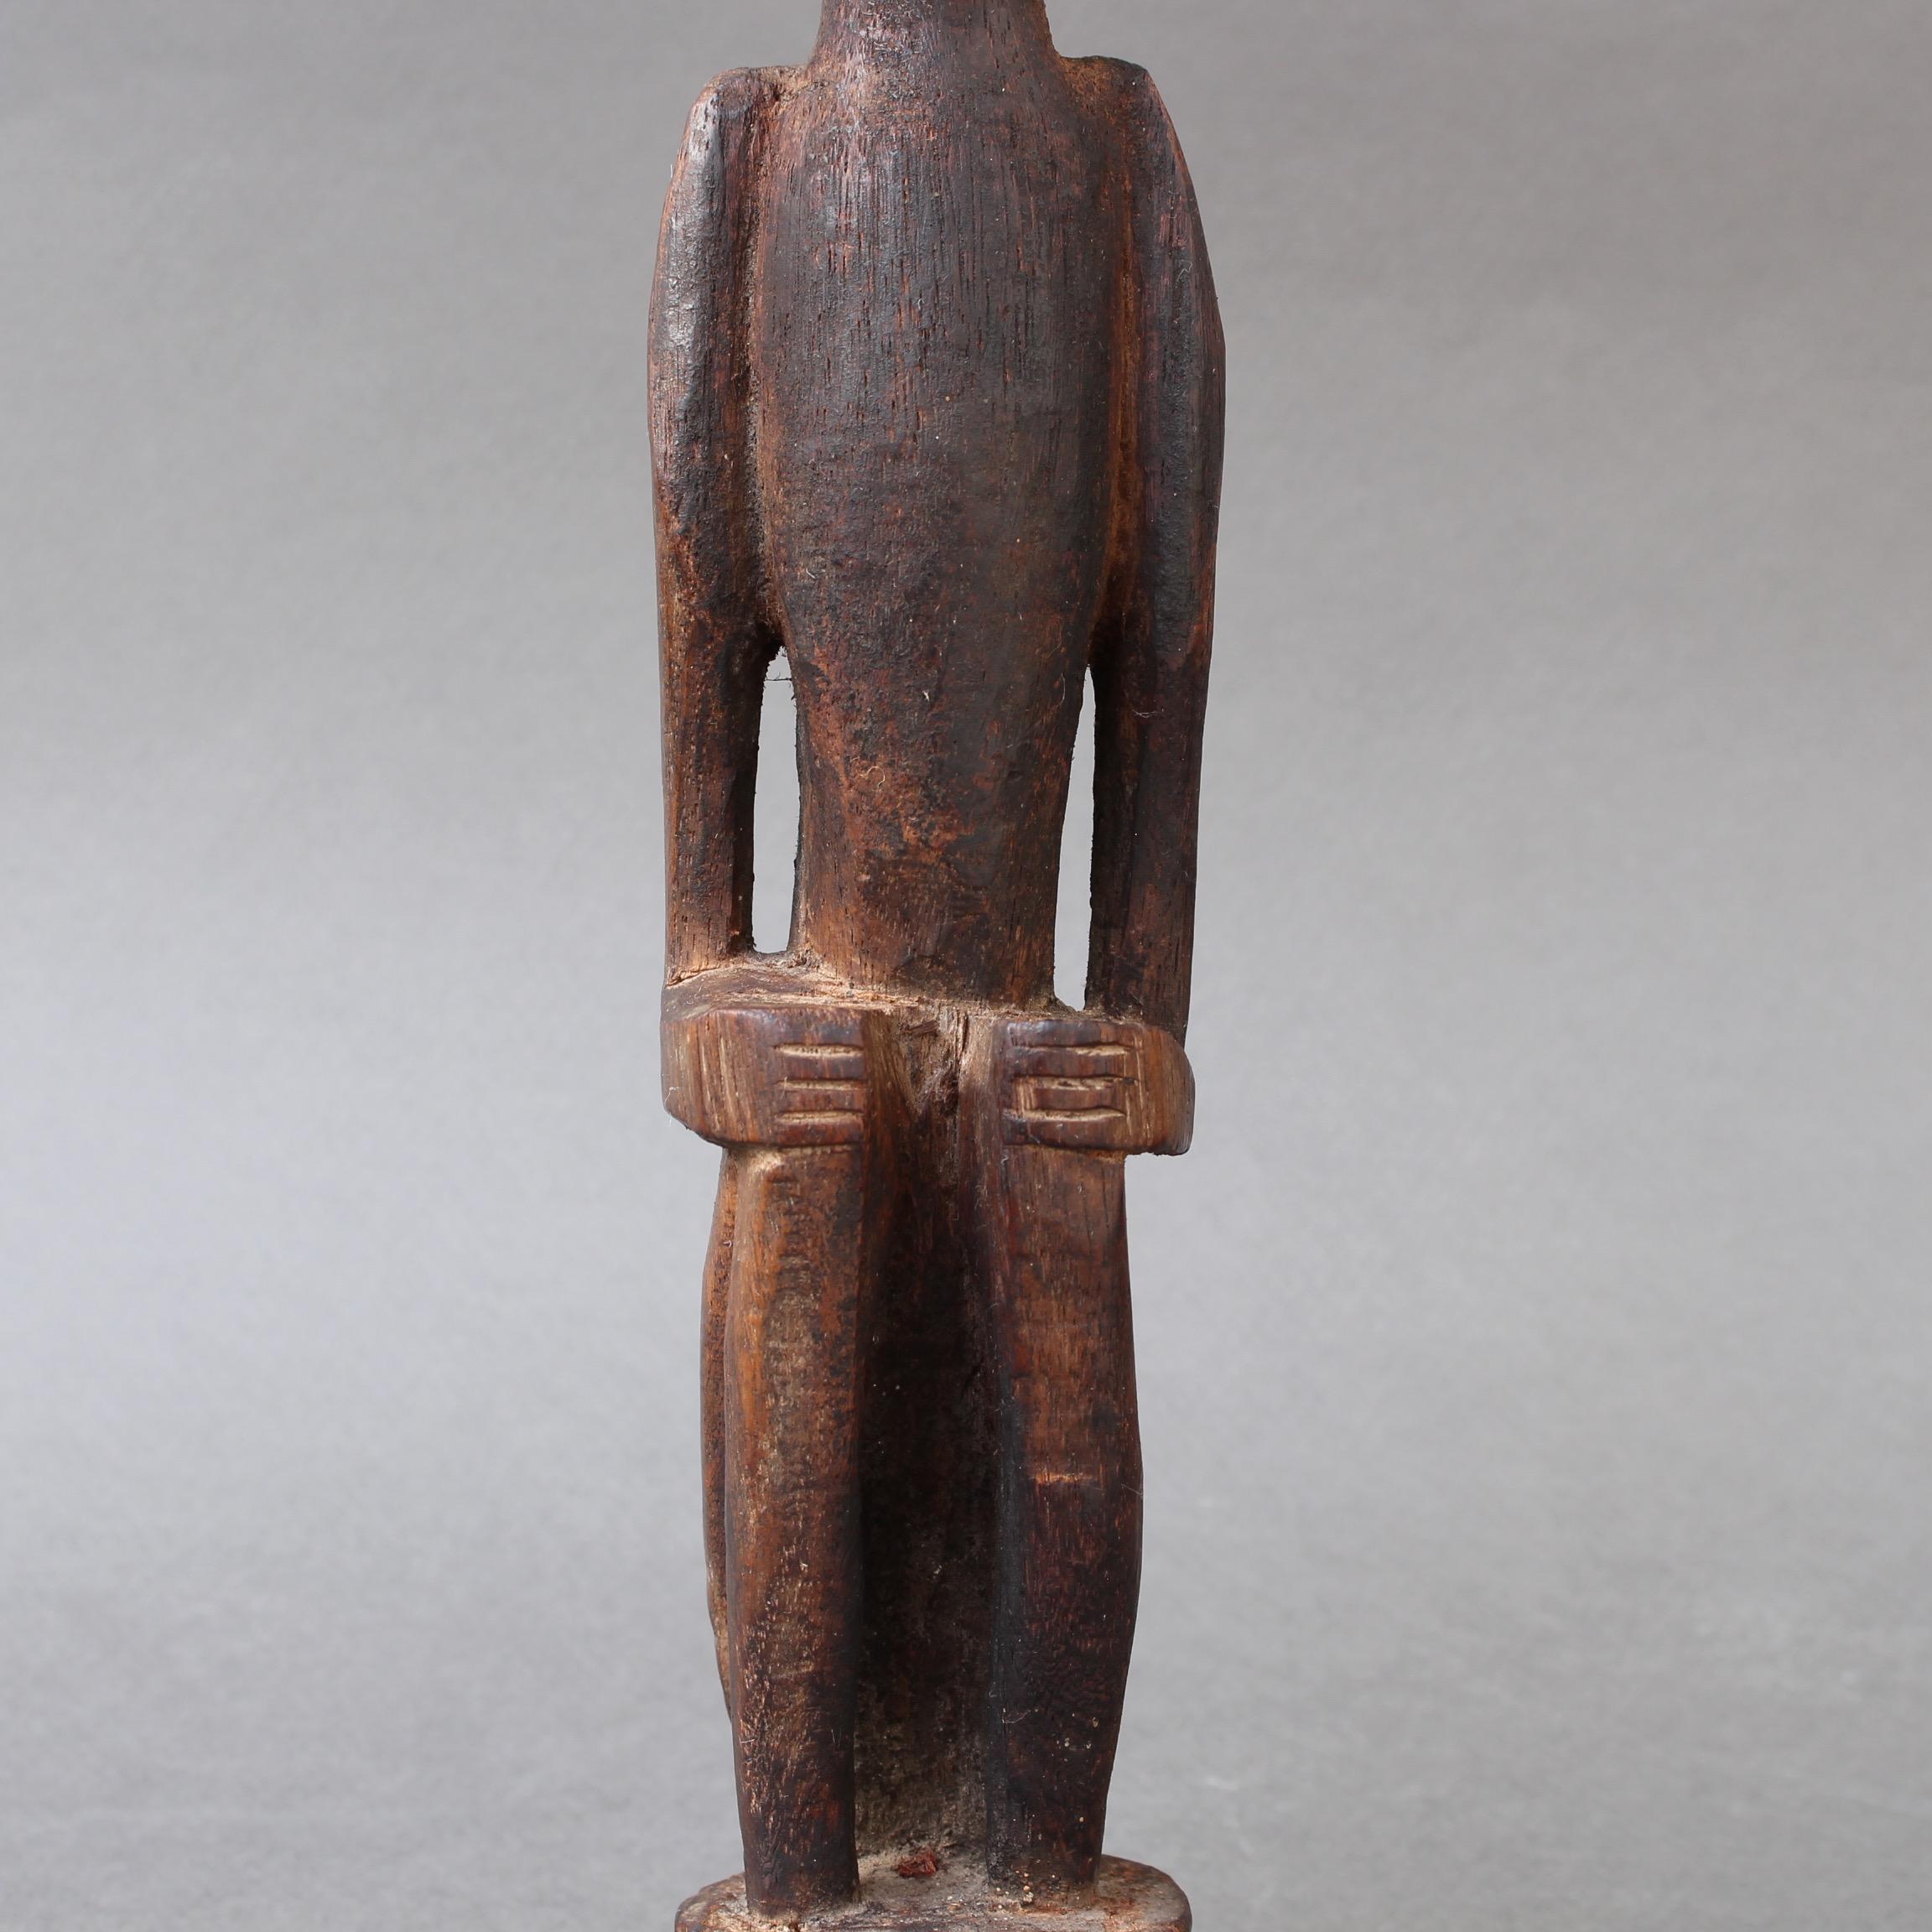 Wooden Sculpture or Carving of Sitting Figure from Sumba Island, Indonesia 8